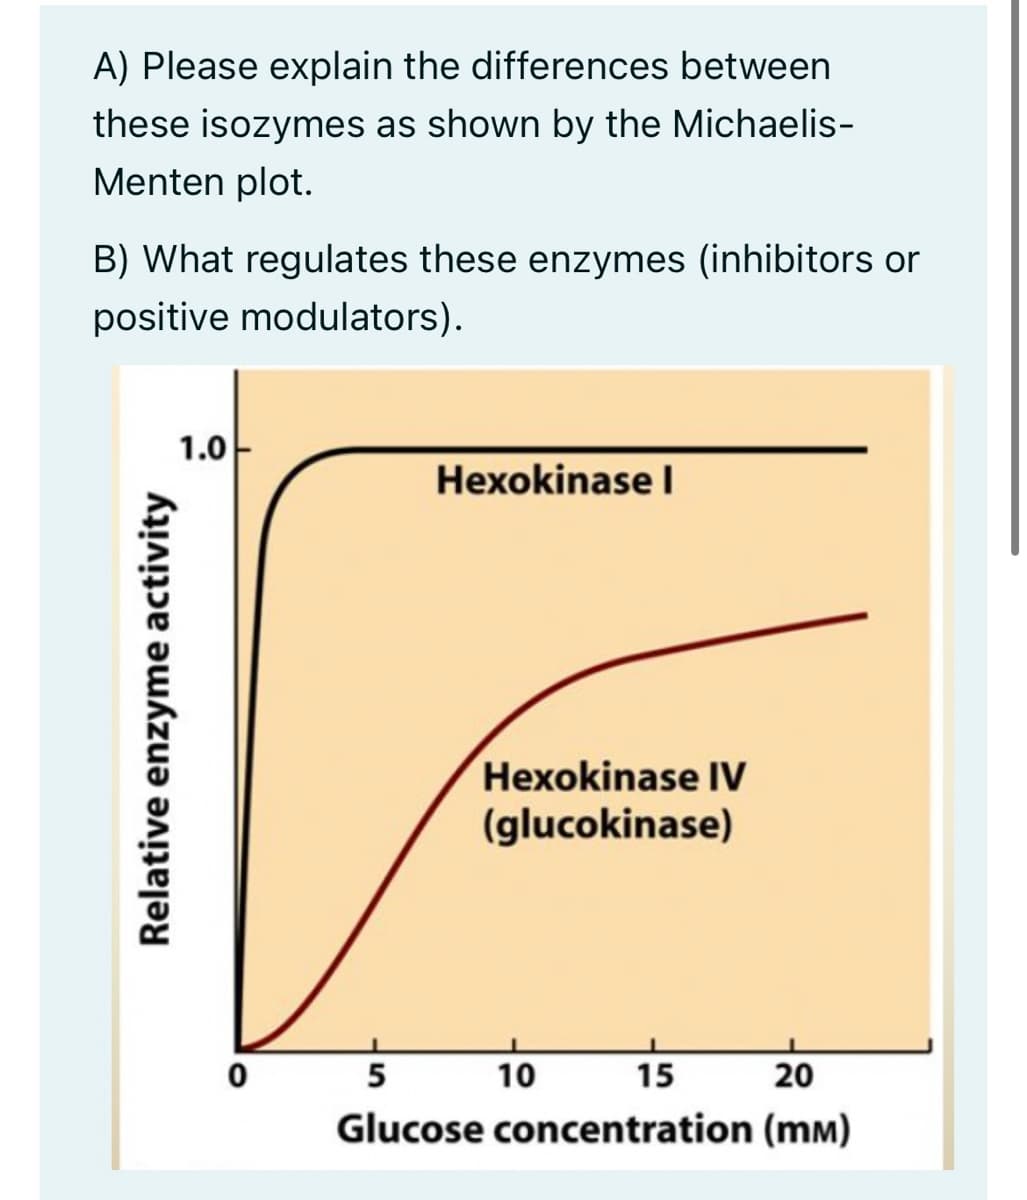 A) Please explain the differences between
these isozymes as shown by the Michaelis-
Menten plot.
B) What regulates these enzymes (inhibitors or
positive modulators).
Relative enzyme activity
1.0
Hexokinase l
Hexokinase IV
(glucokinase)
5
15
20
Glucose concentration (mm)
10